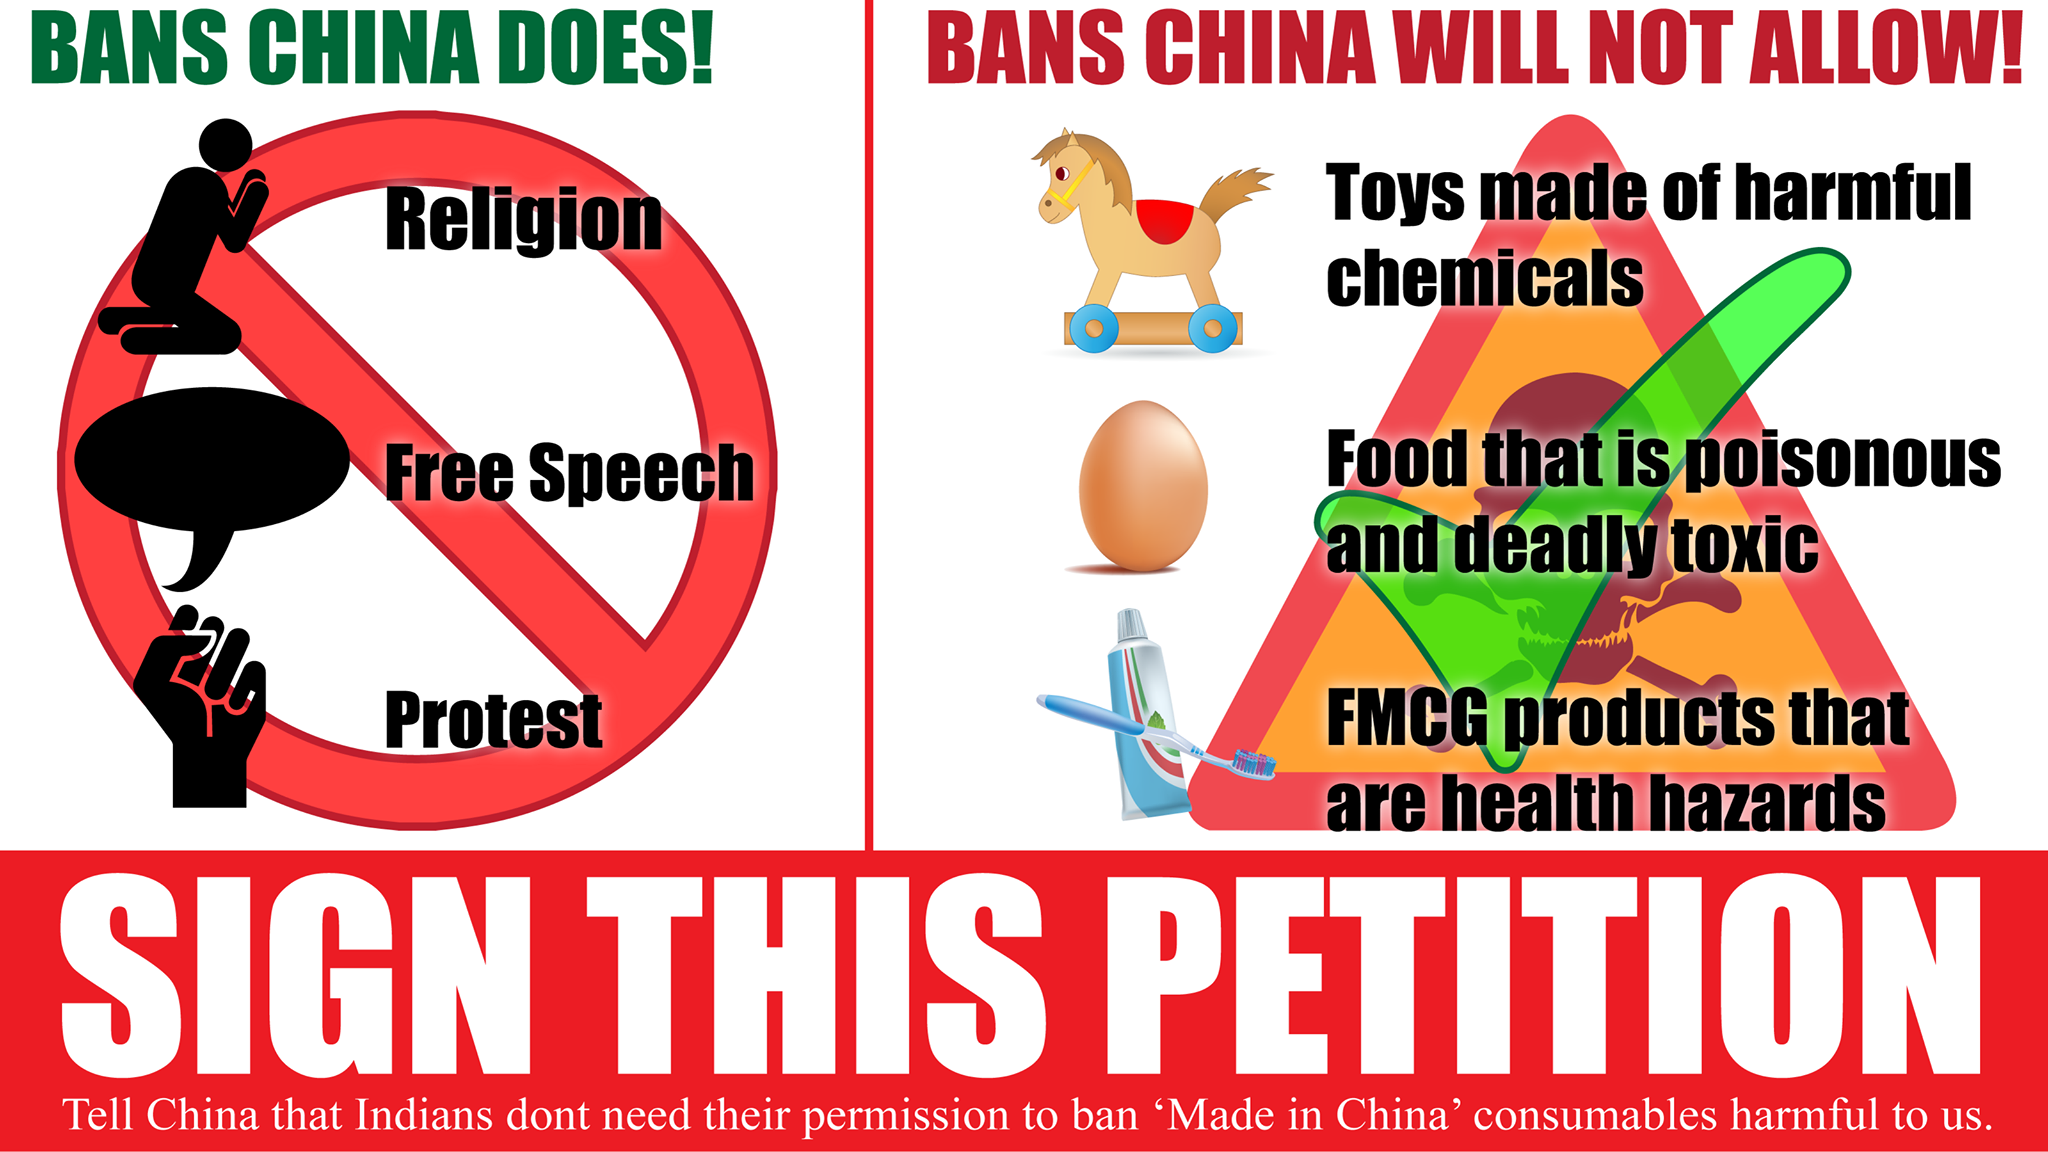 Encourage Indians to Sign for 1 000 Signatures: Protecting Religion and Free Speech in China.